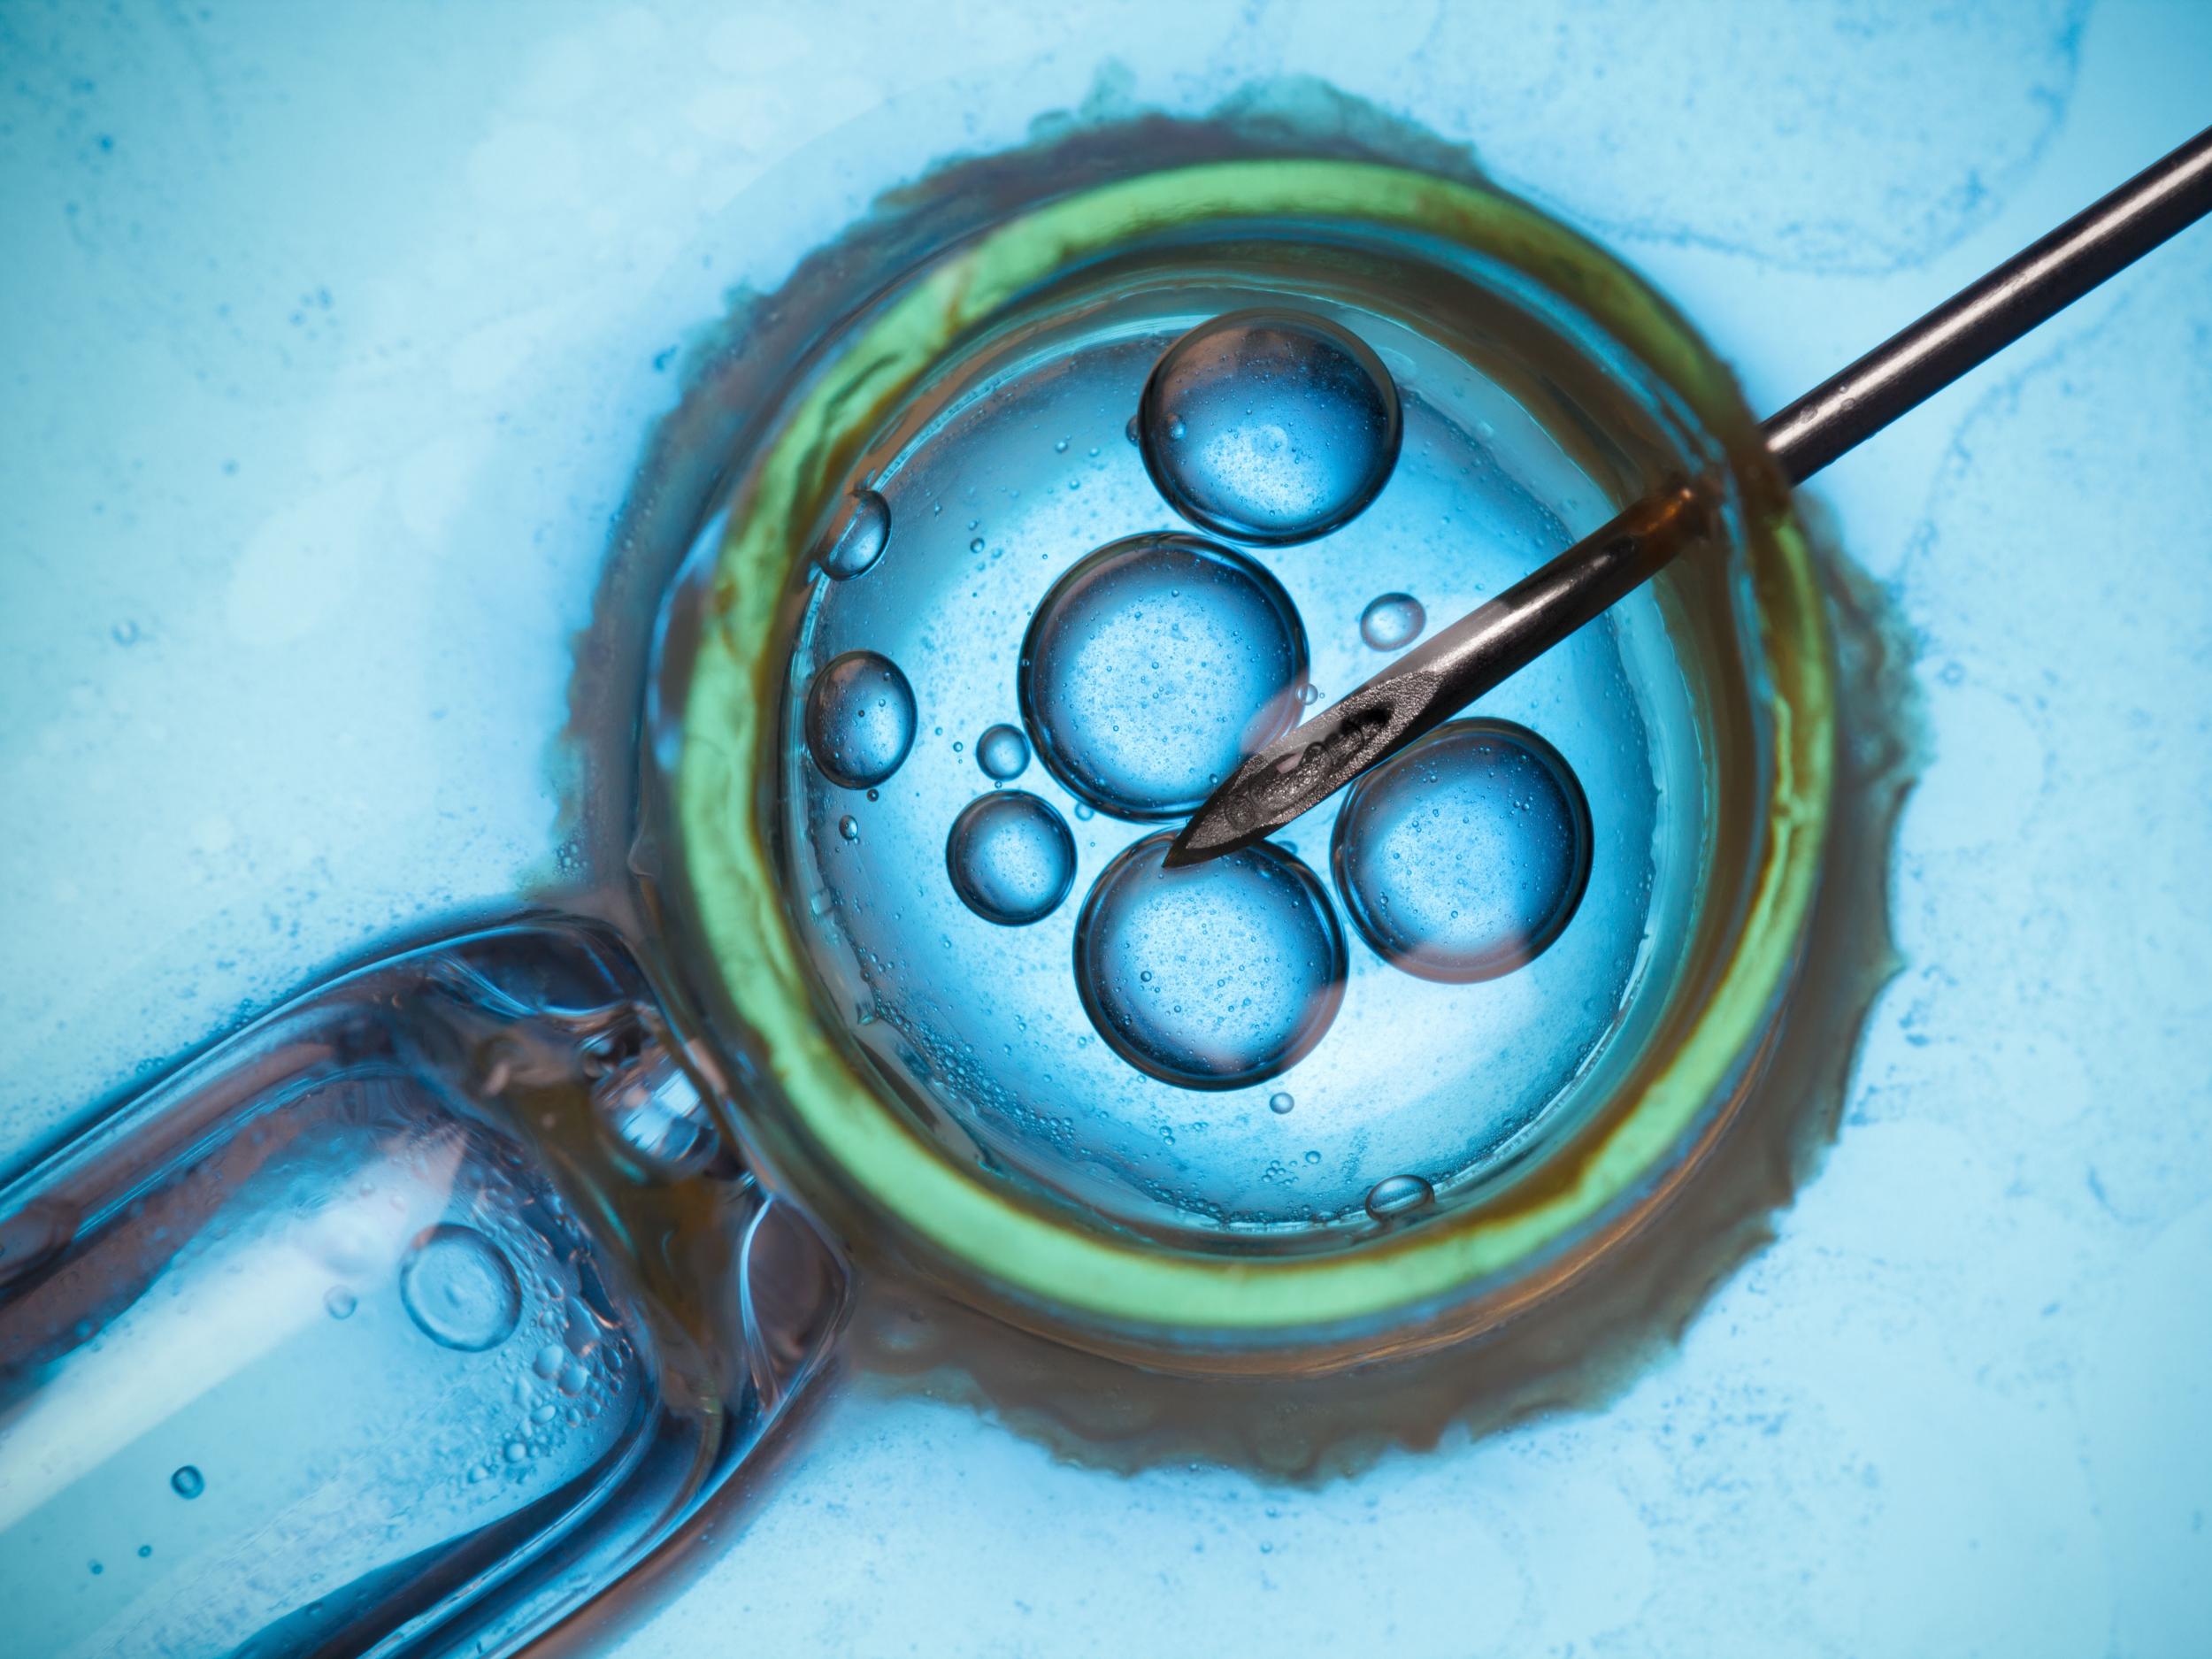 Six out of 10 IVF cycles in the UK are funded by patients themselves, according to the the Royal College of Obstetricians and Gynaecologists